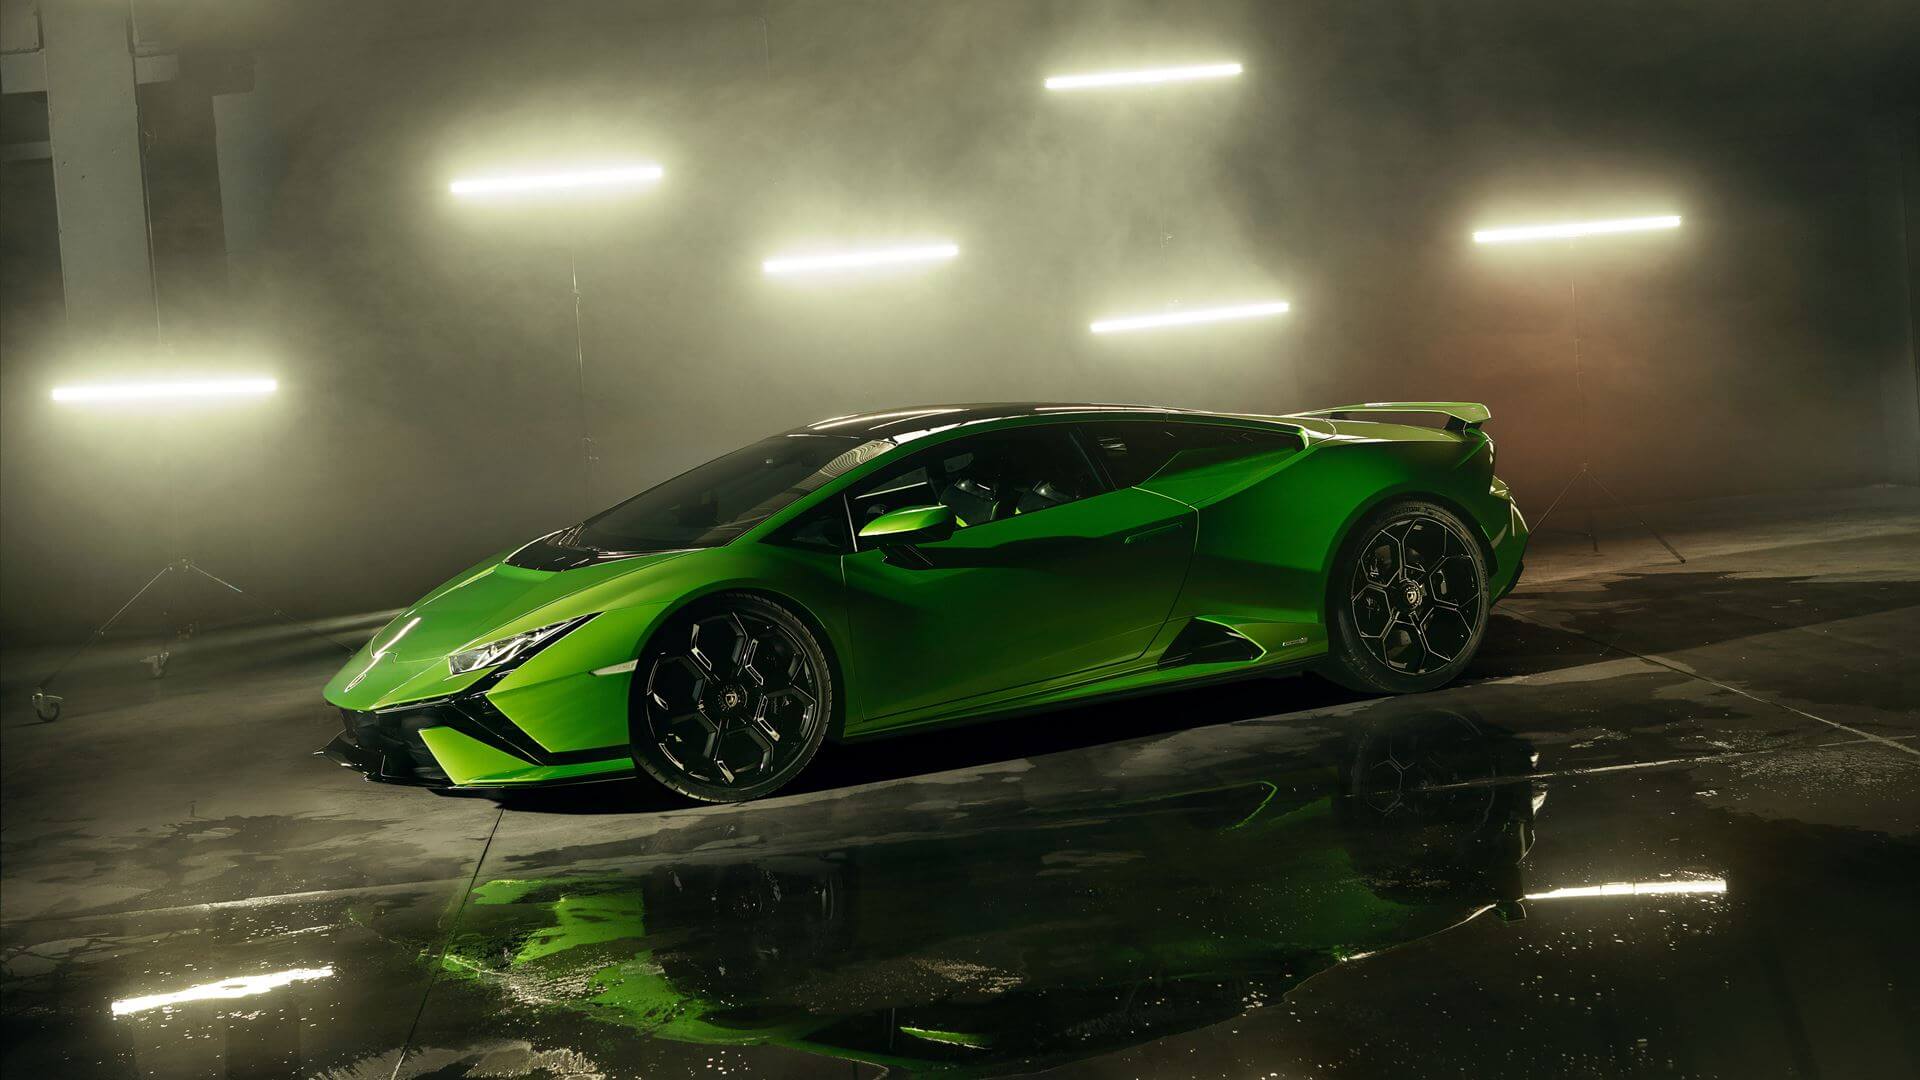 New thrills on the road and on the track: Lamborghini Huracan Tecnica 2022